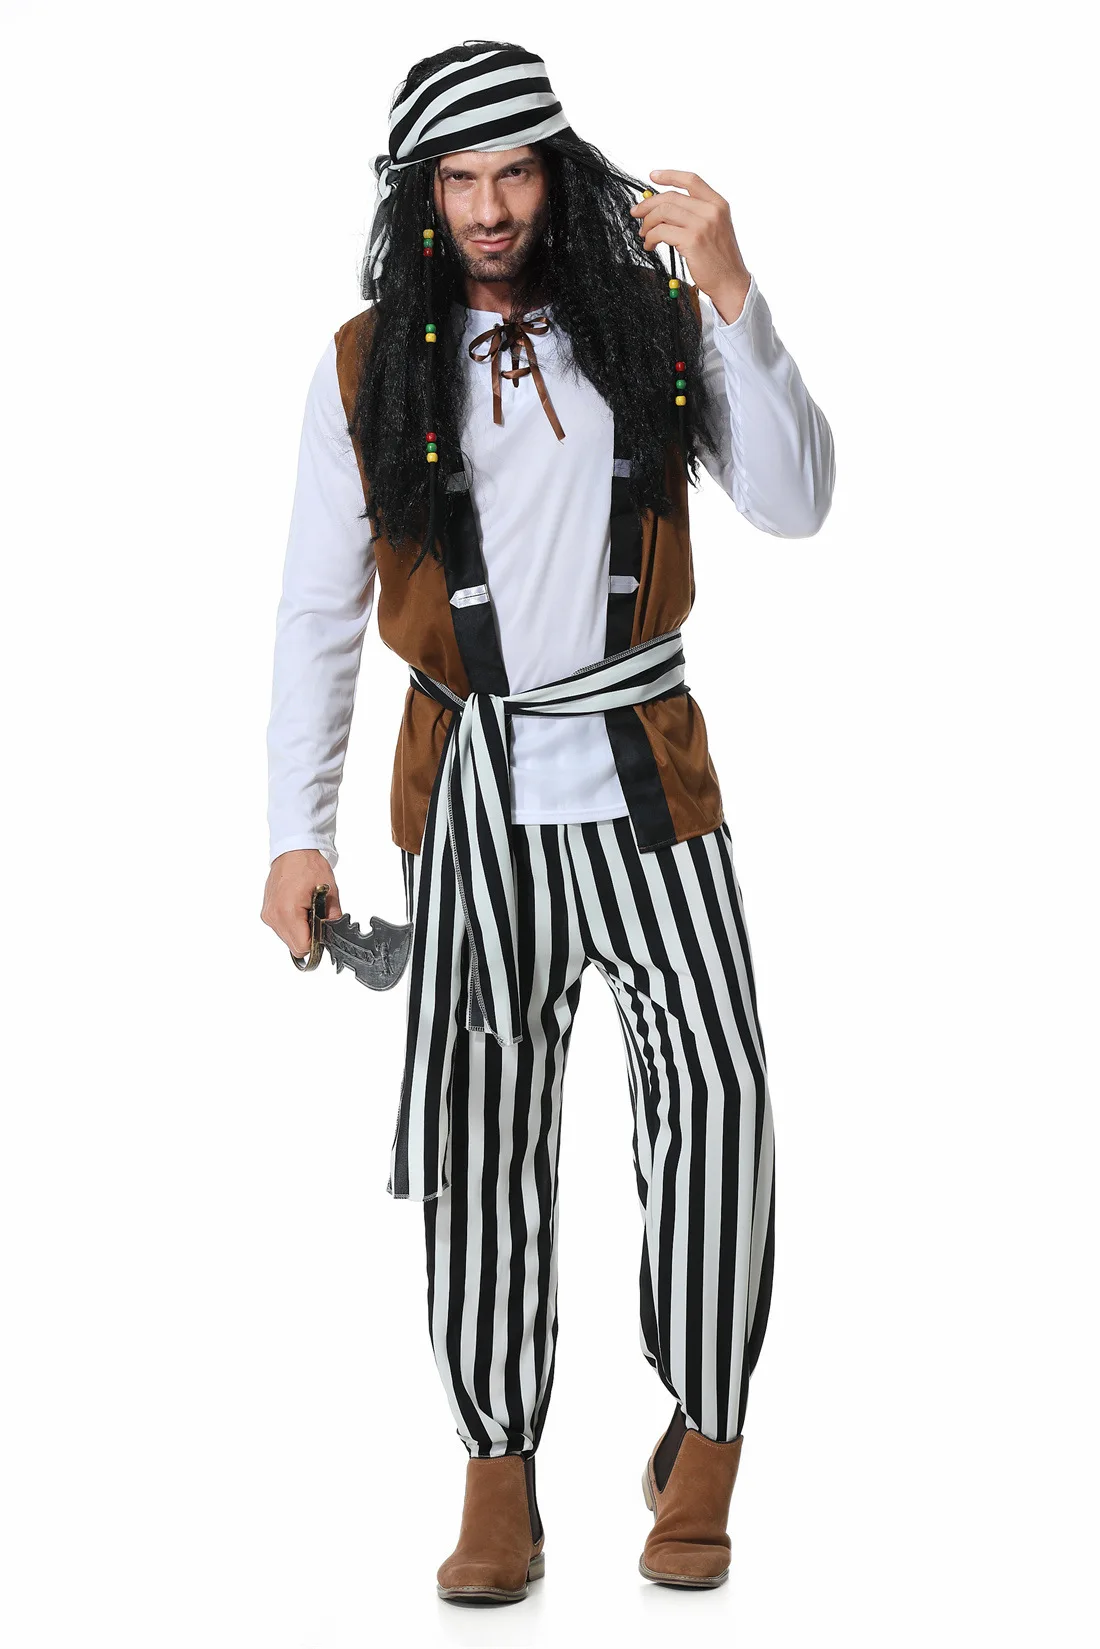 Captain Pirate Costumes Fancy Cosplay Dress Halloween Carnival Party Uniforms Jack Sparrow Clothes for Family Masquerade Cosplay